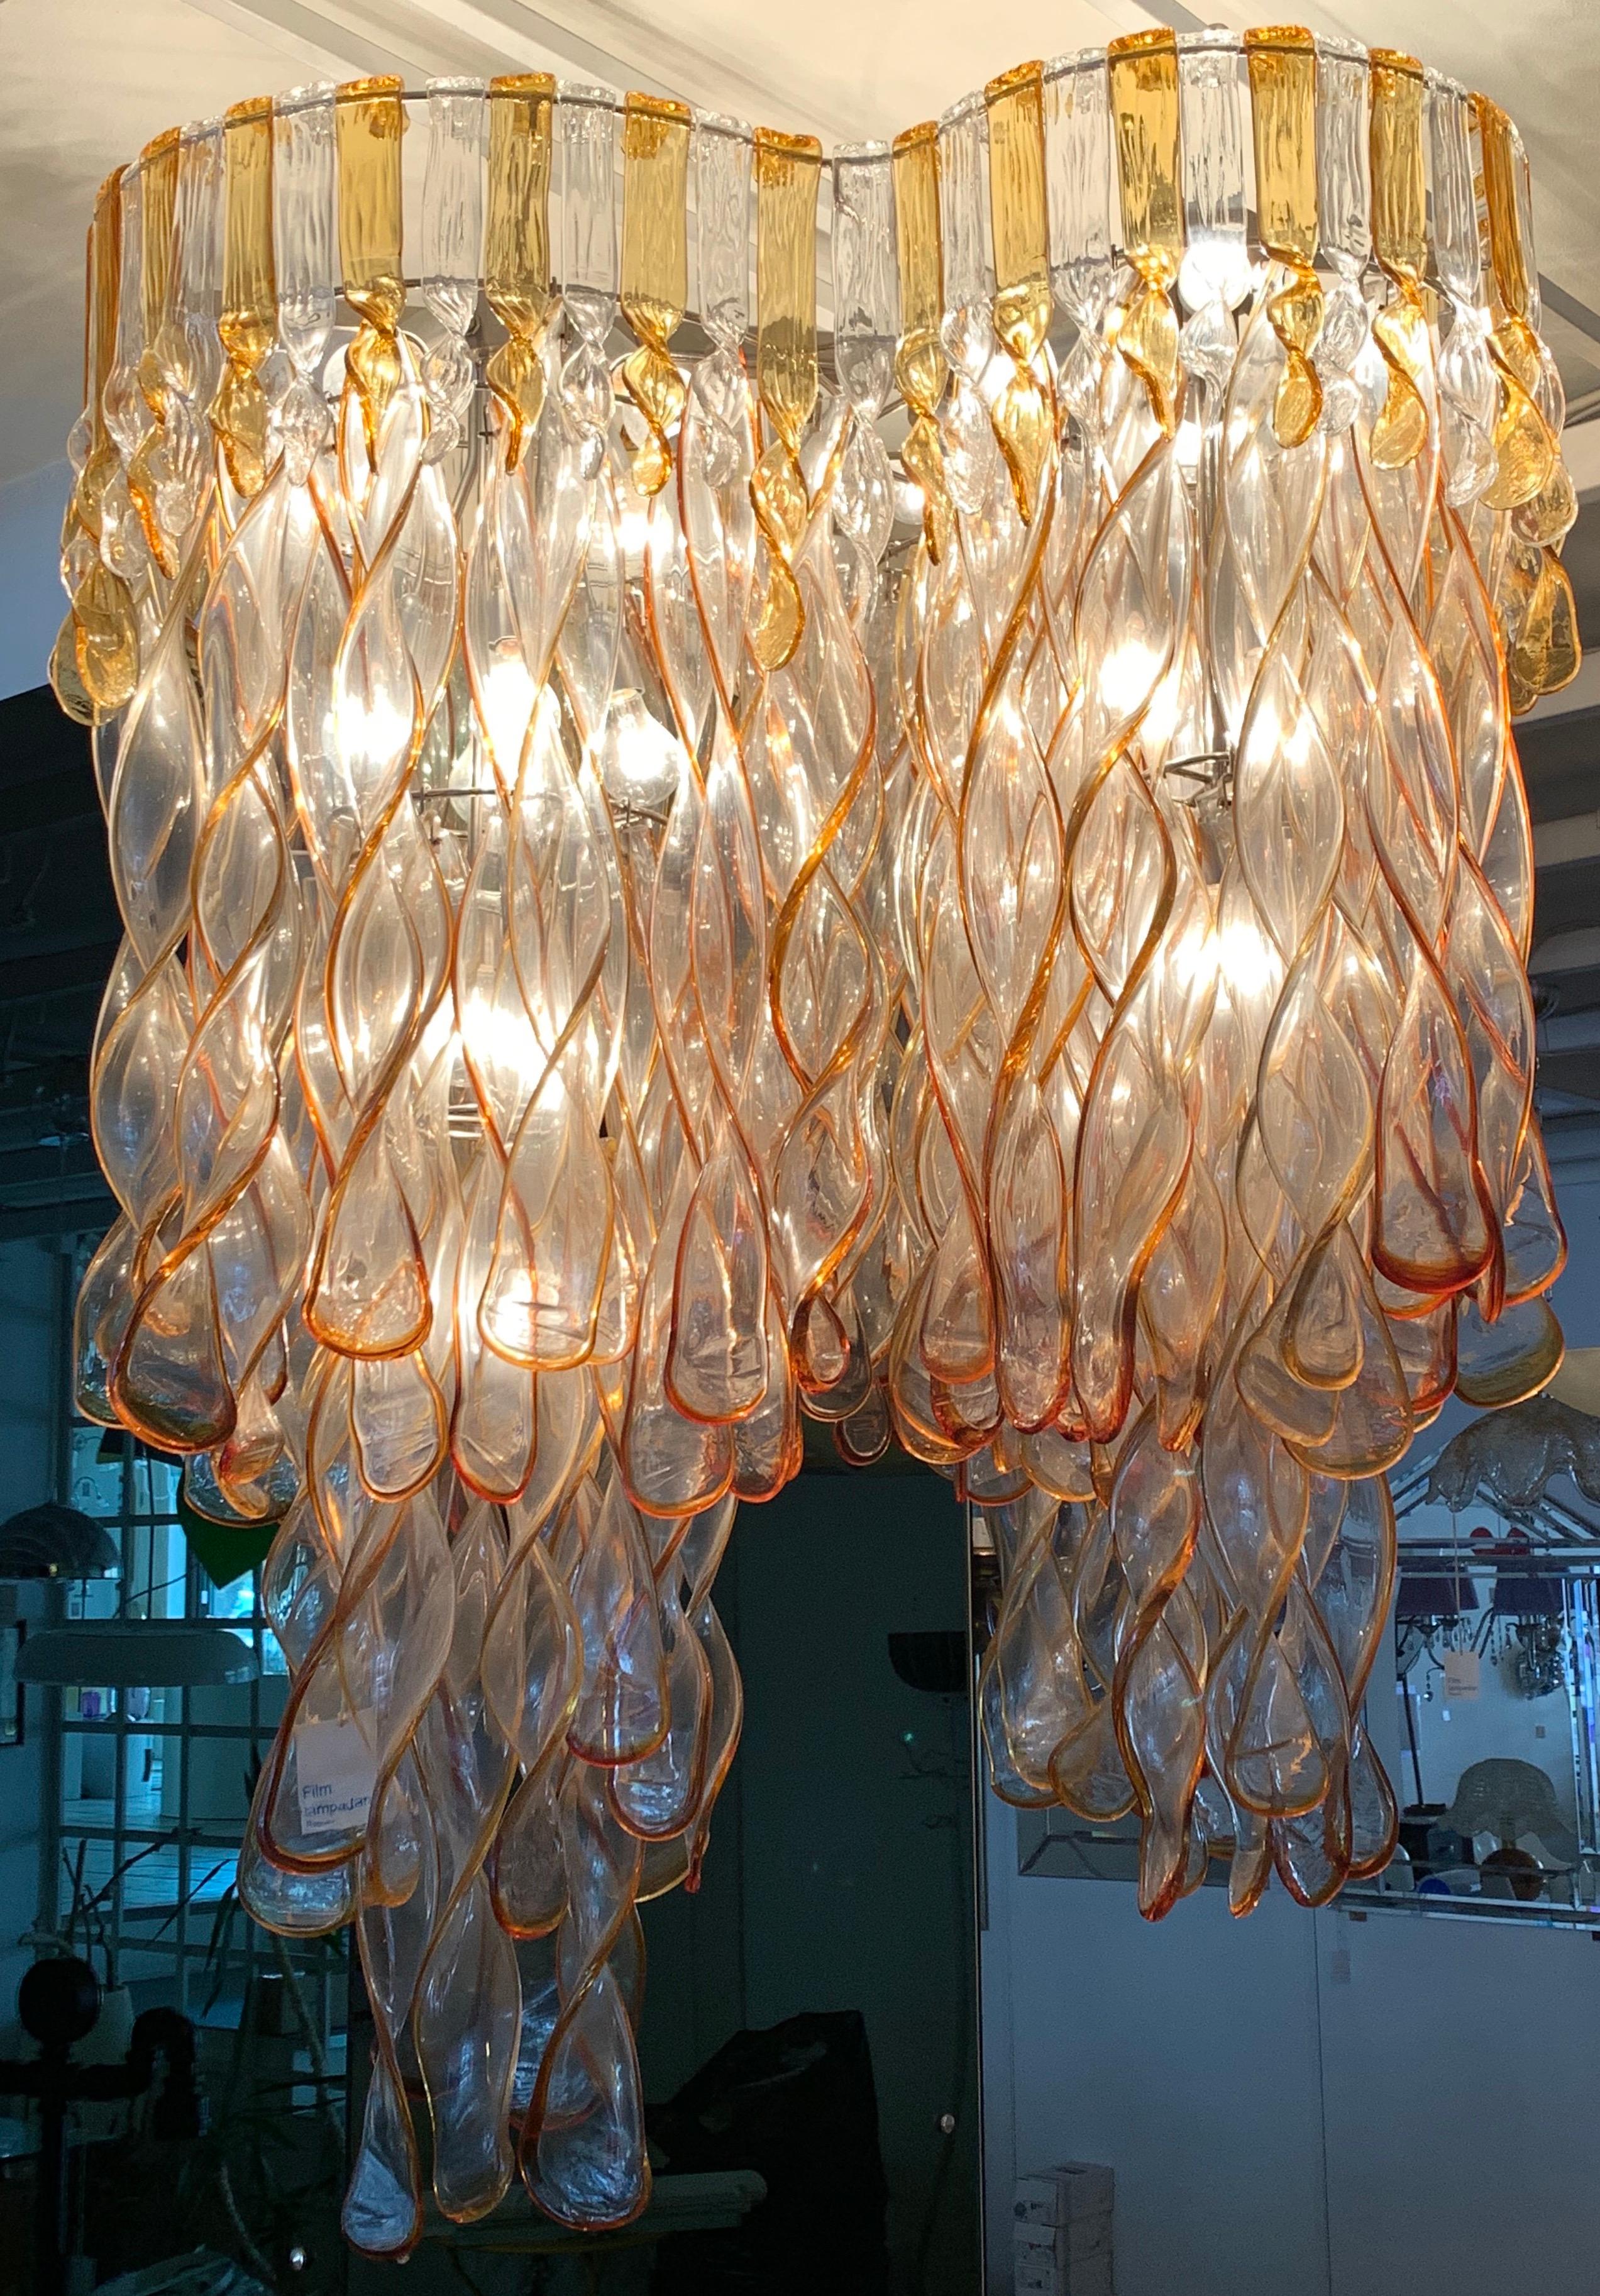 Mid-20th Century Important Large Chandelier Elica Model  by Aureliano Toso Murano 1960 - 70 For Sale